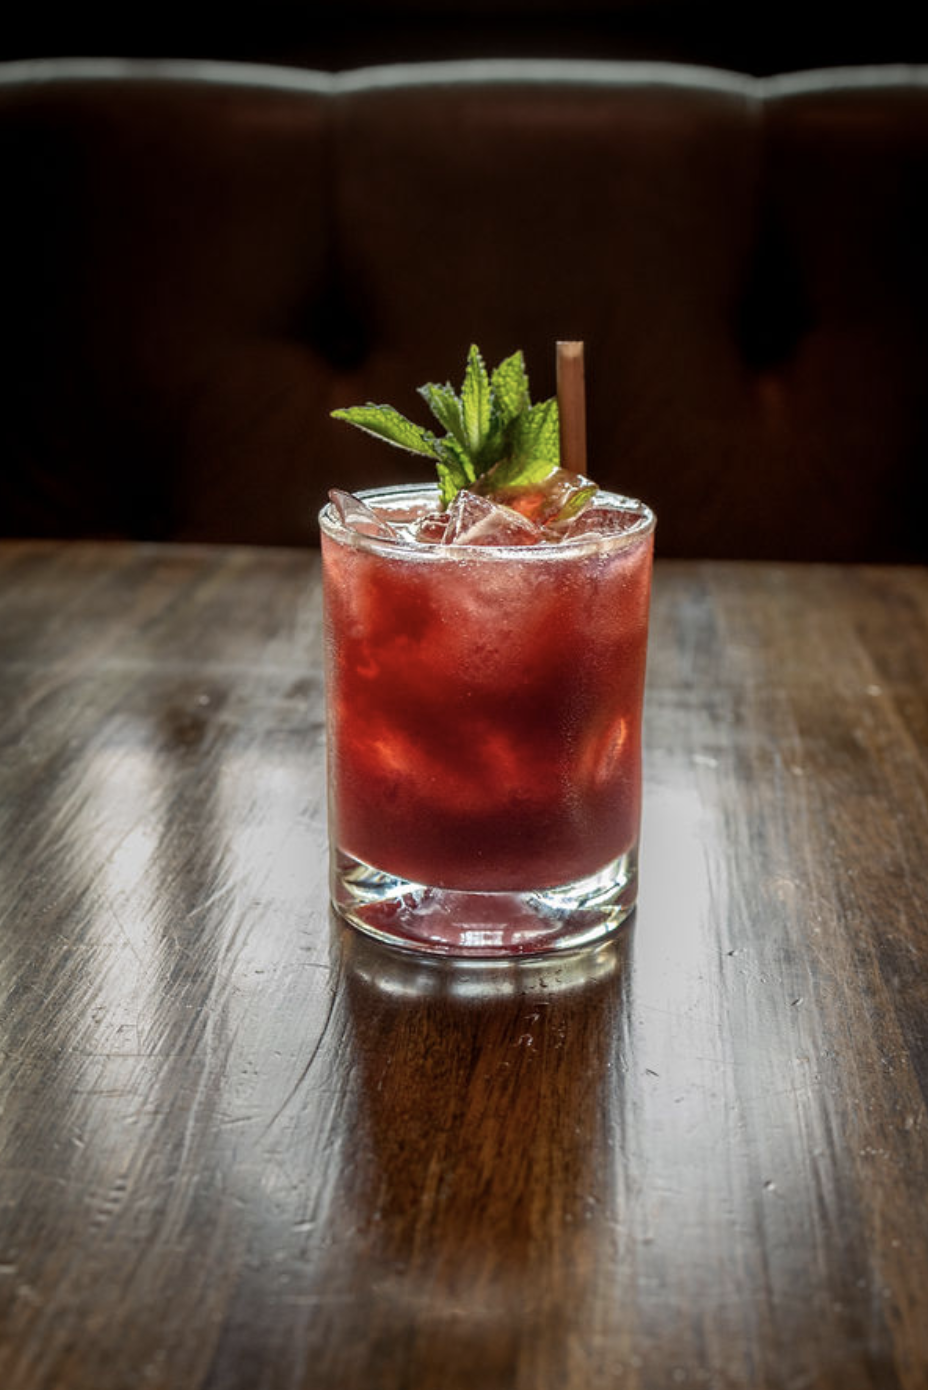 City Cellar, at The Square in West Palm Beach, will offer this love aphrodisiac called the Blackberry Smash for Valentine's Day. Created by beverage manager Danielle Wineburg, it features Woodford Reserve bourbon, blackberry, mint, and fresh lime.